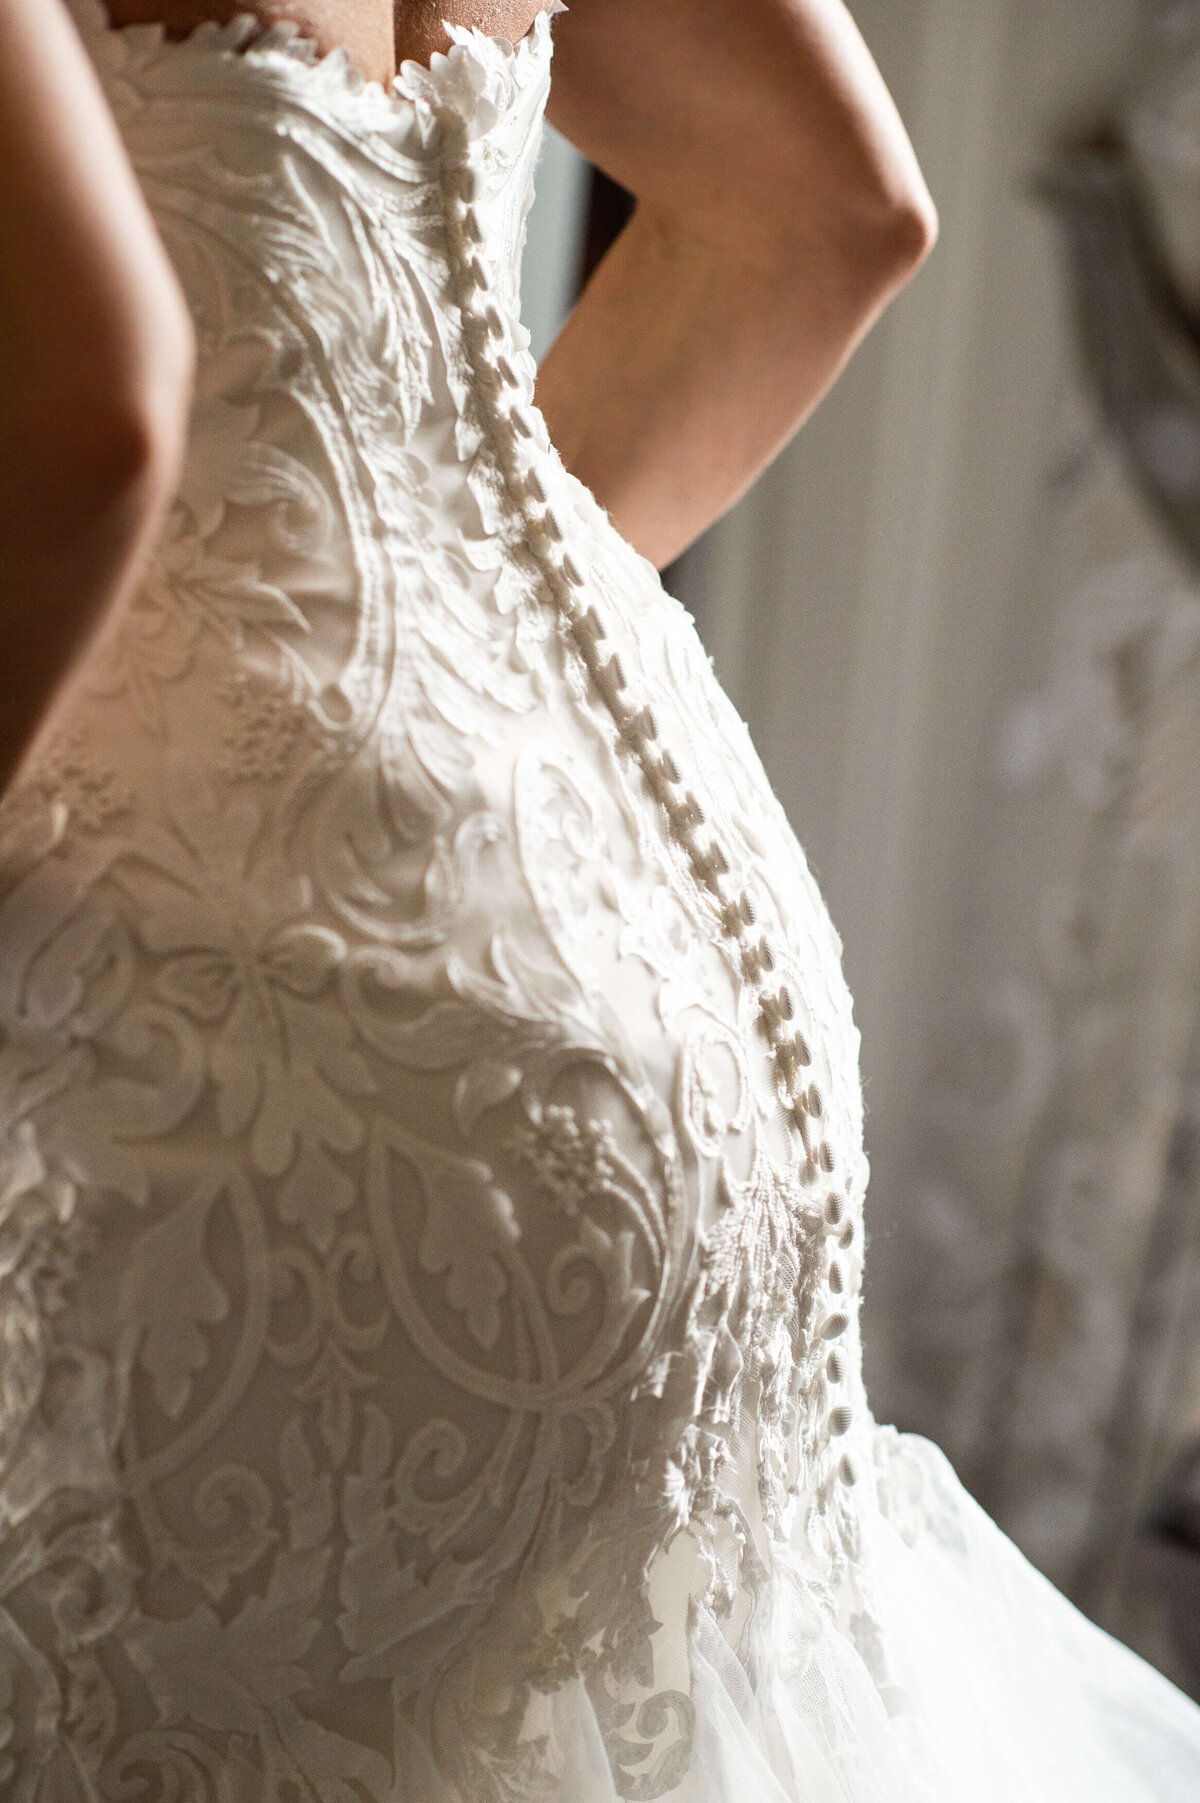 Ottawa wedding photography showing closeup button details of the bride's gown